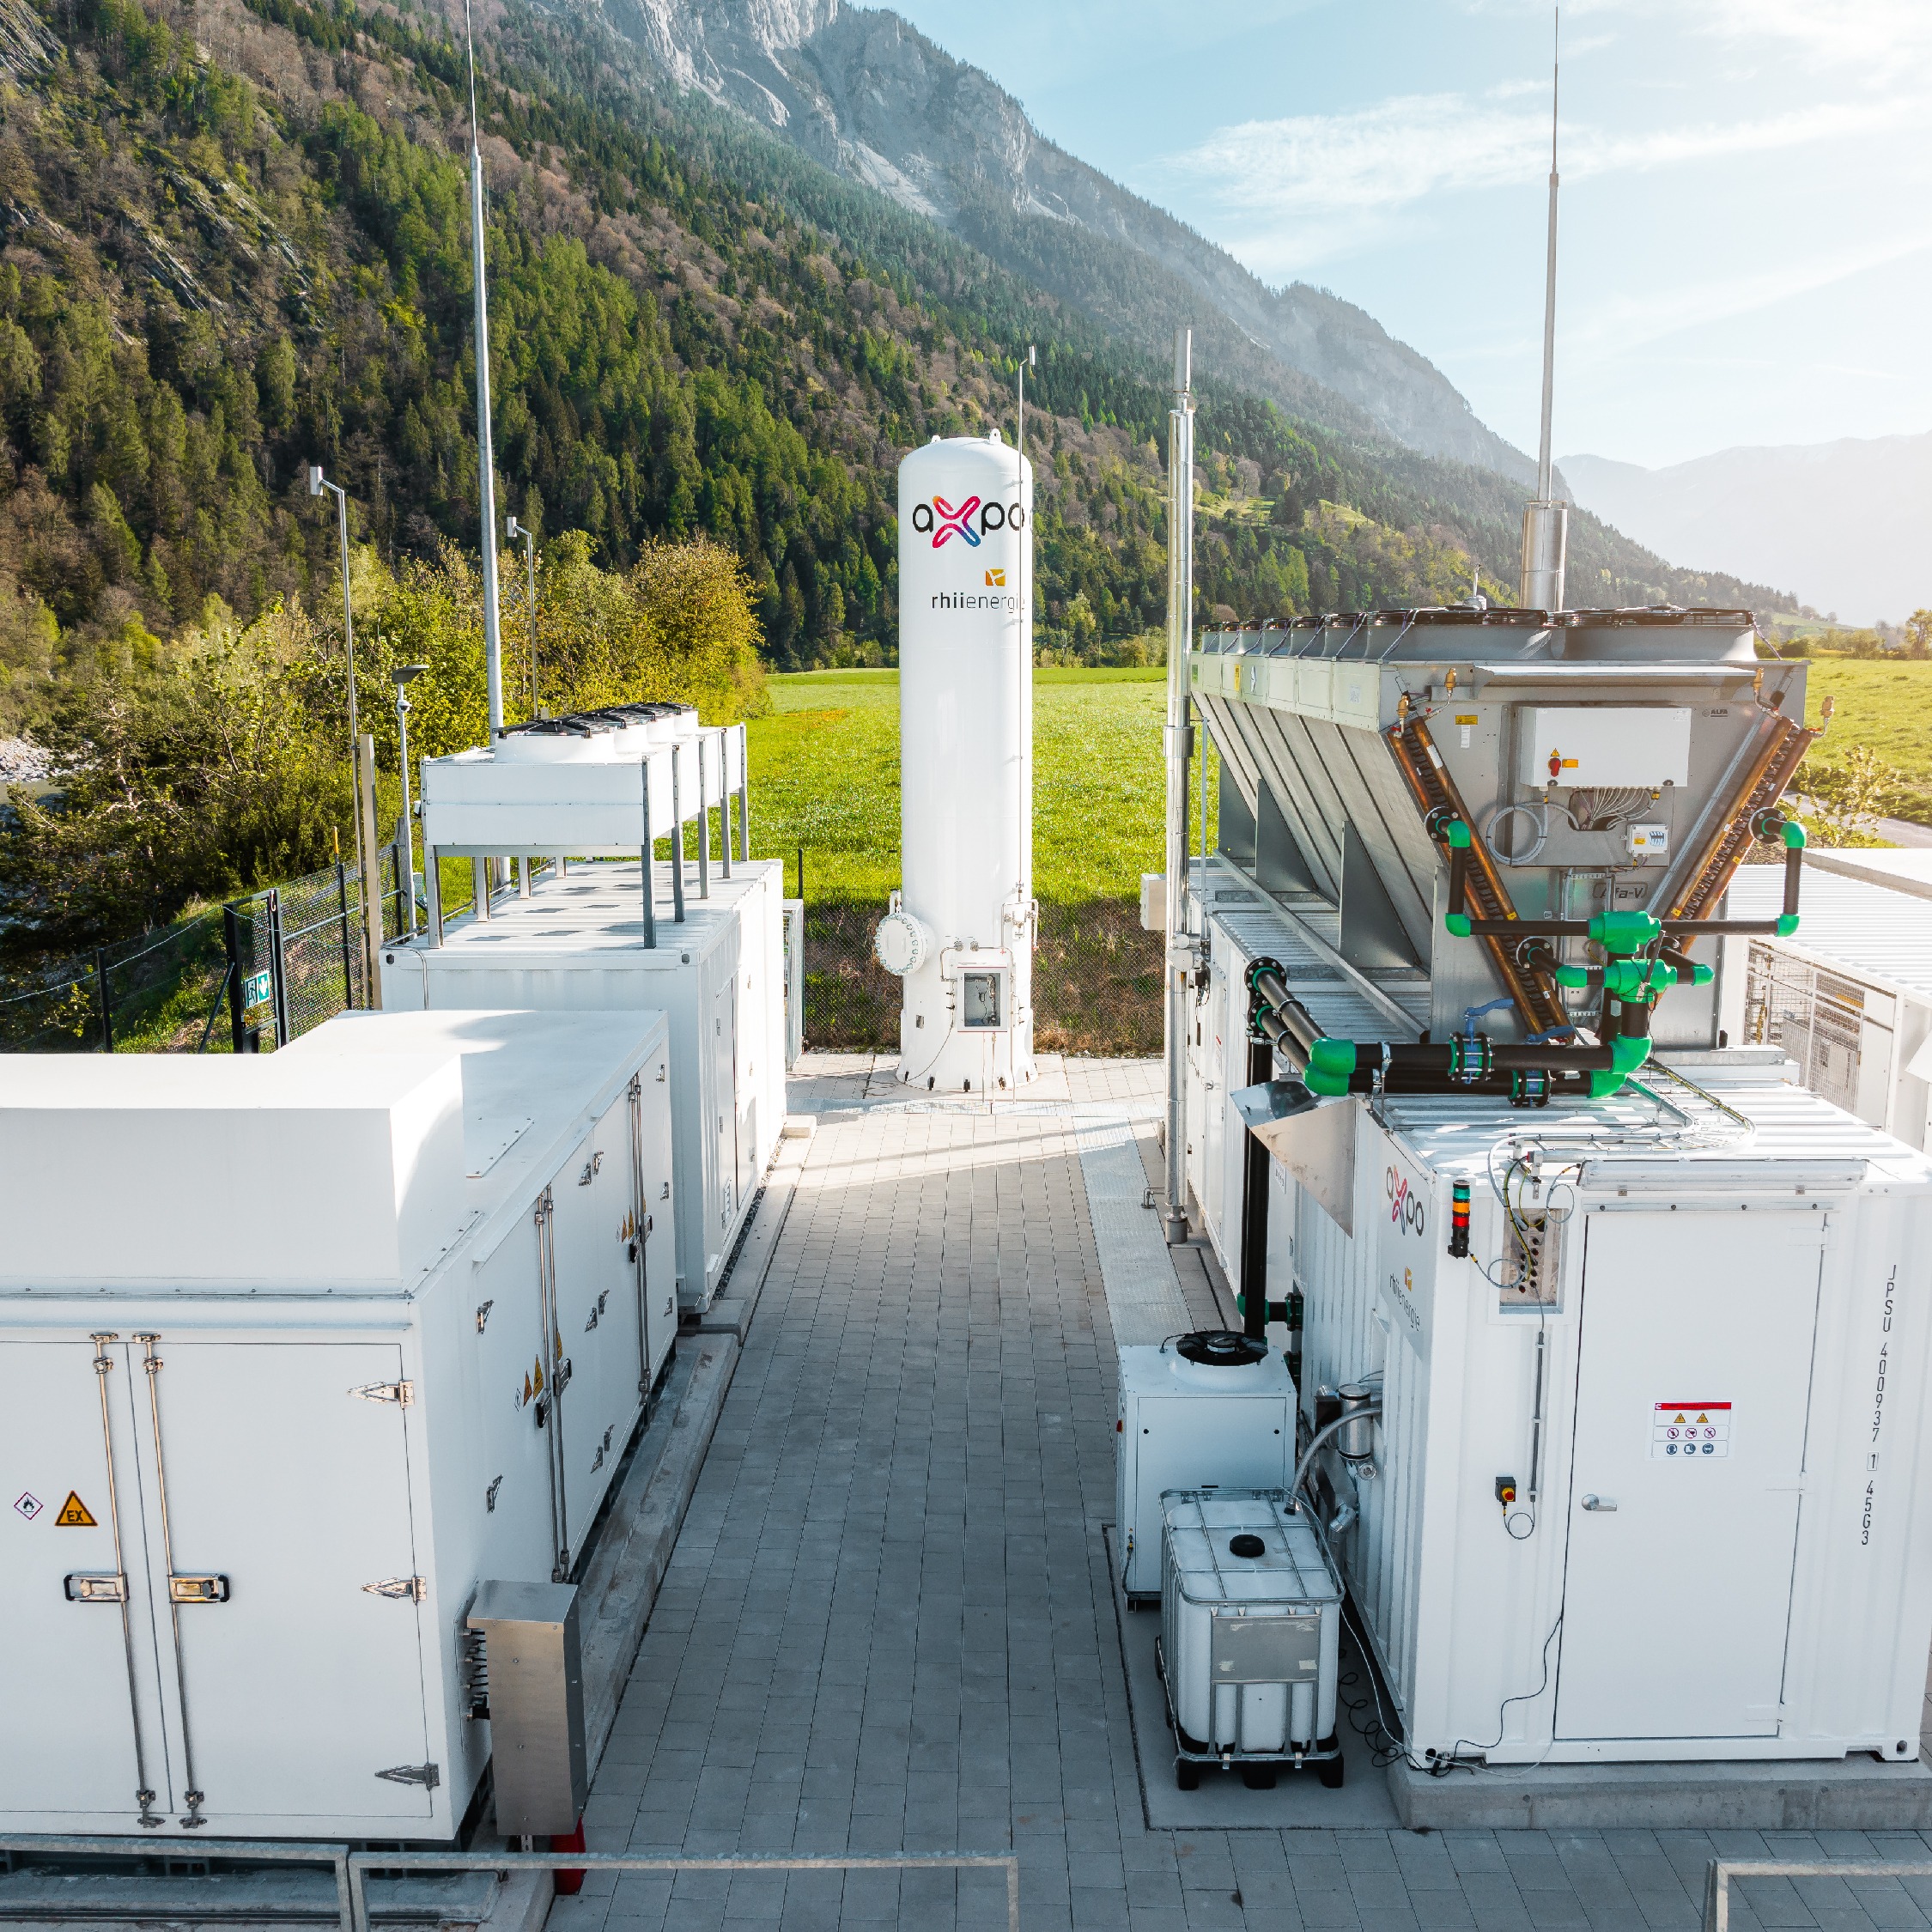 Axpo and Rhiienergie Launch Switzerland's Largest Green Hydrogen Production Facility